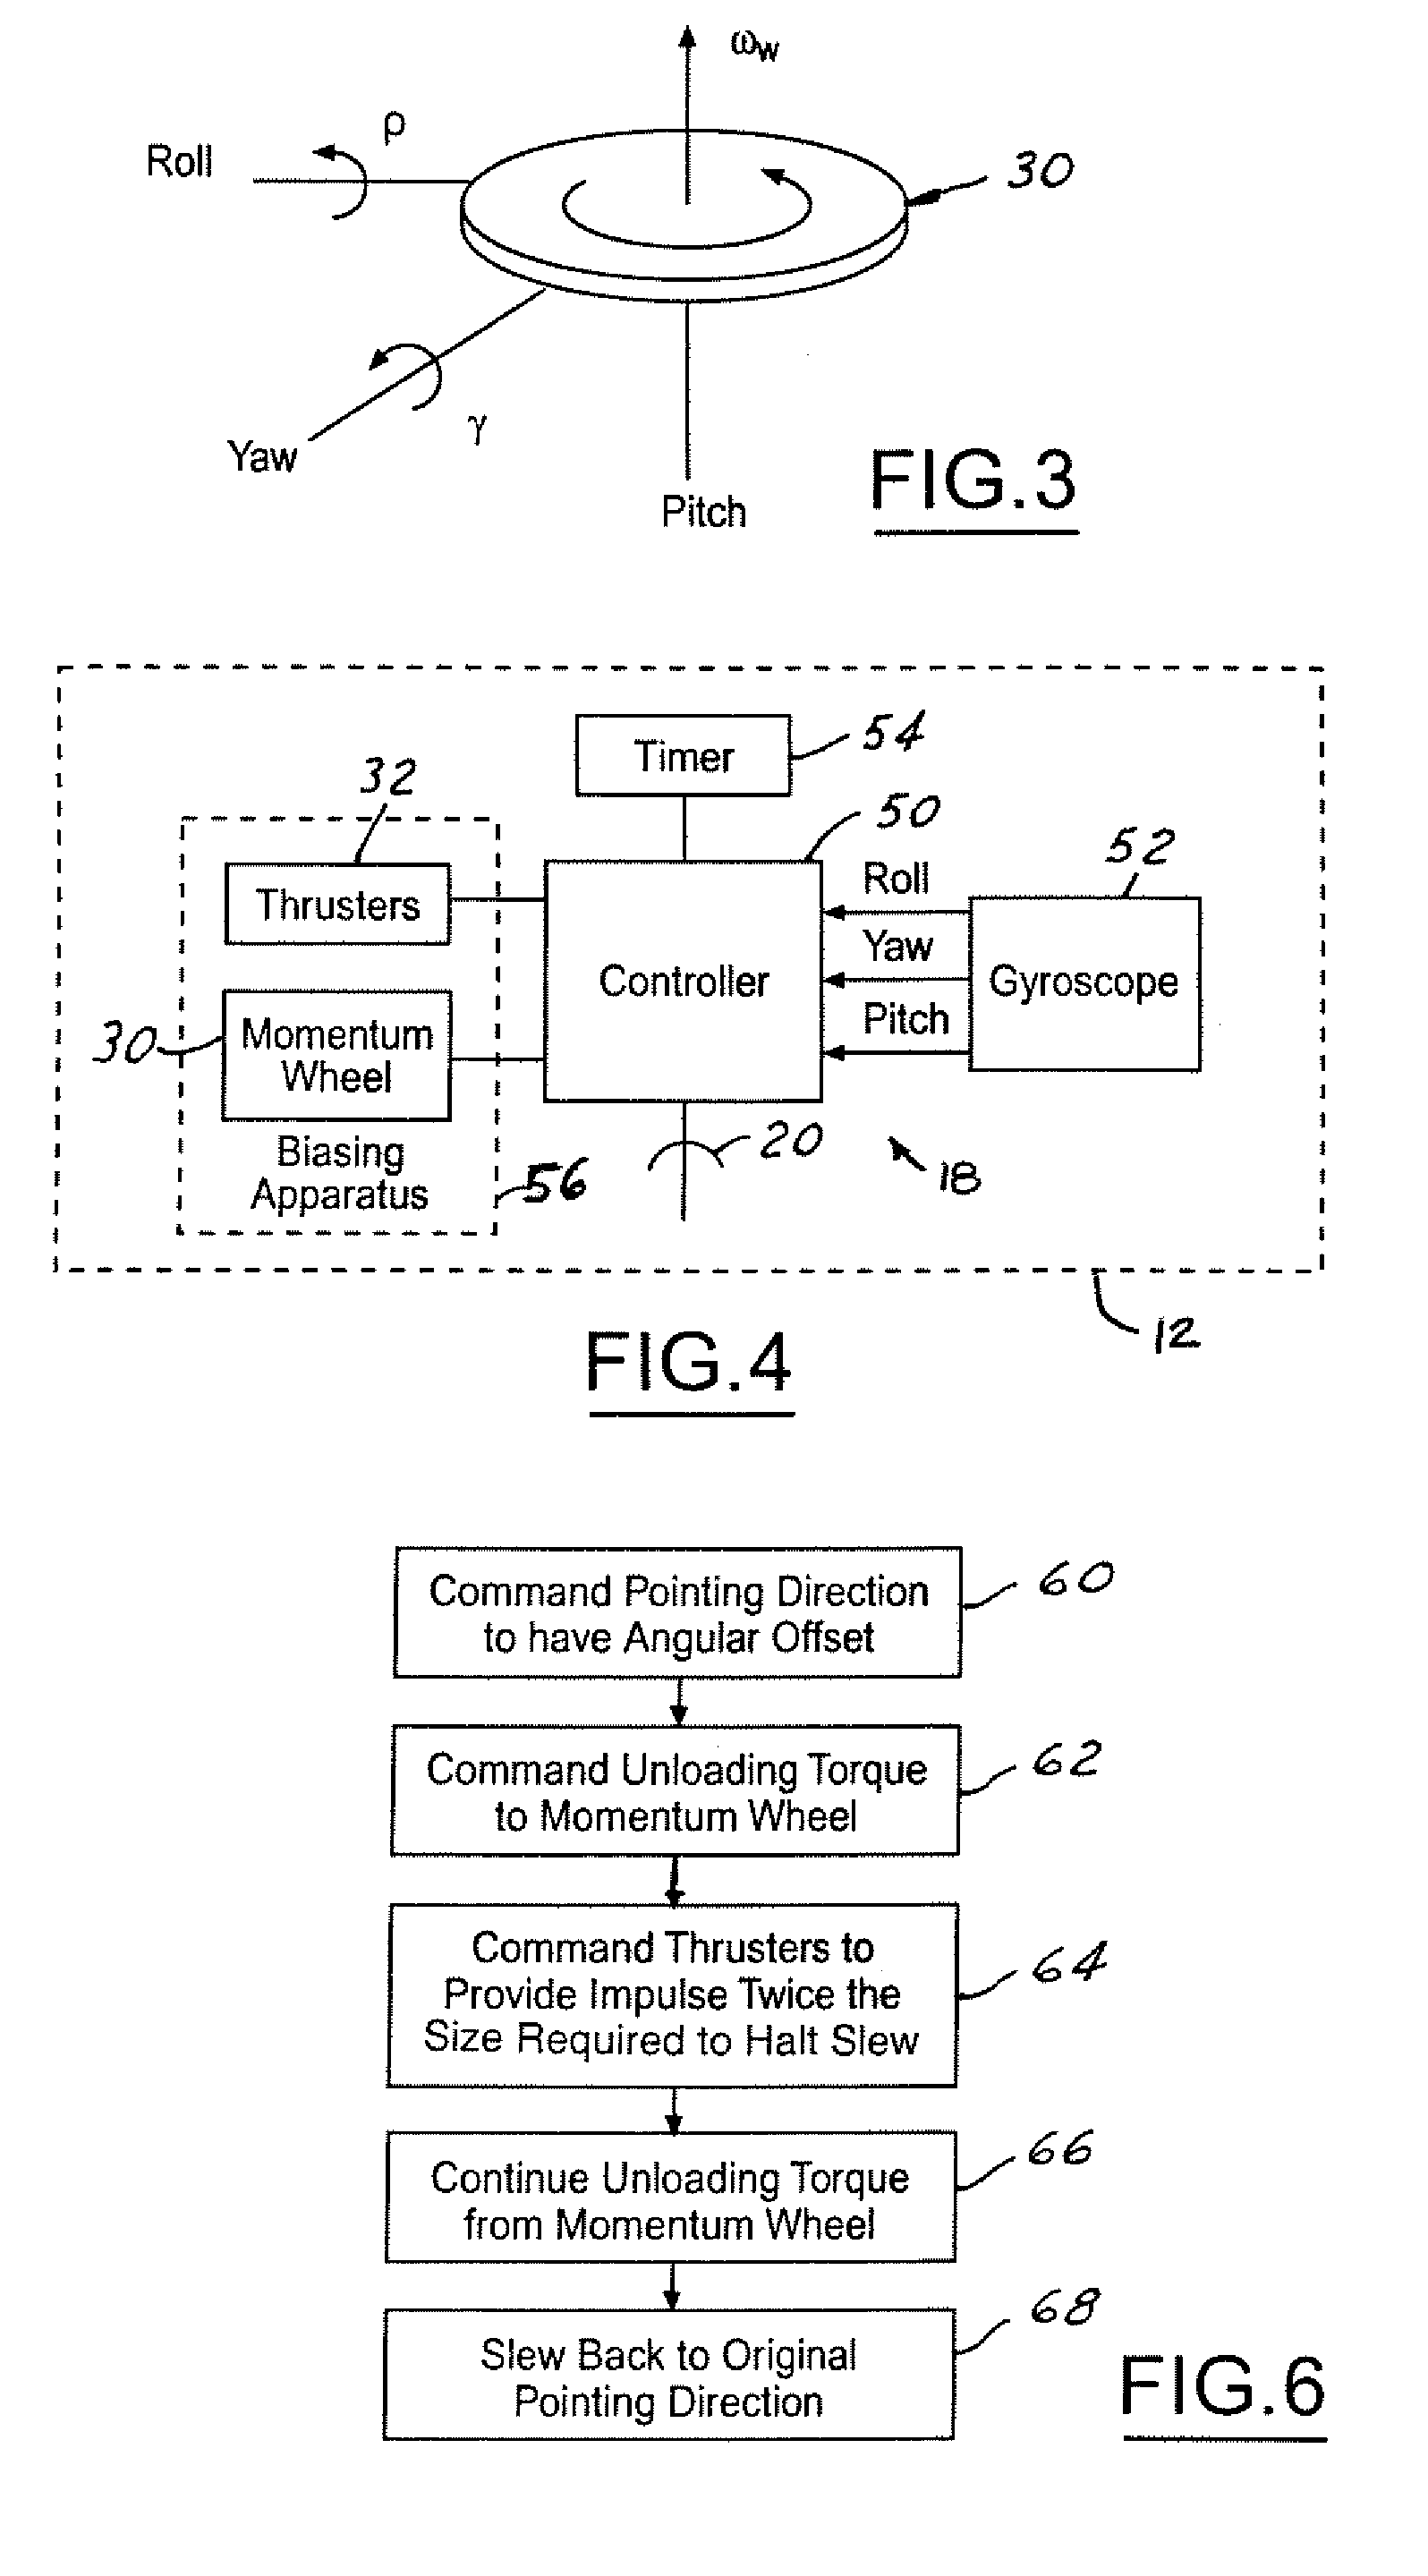 System for counteracting a disturbance in a spacecraft